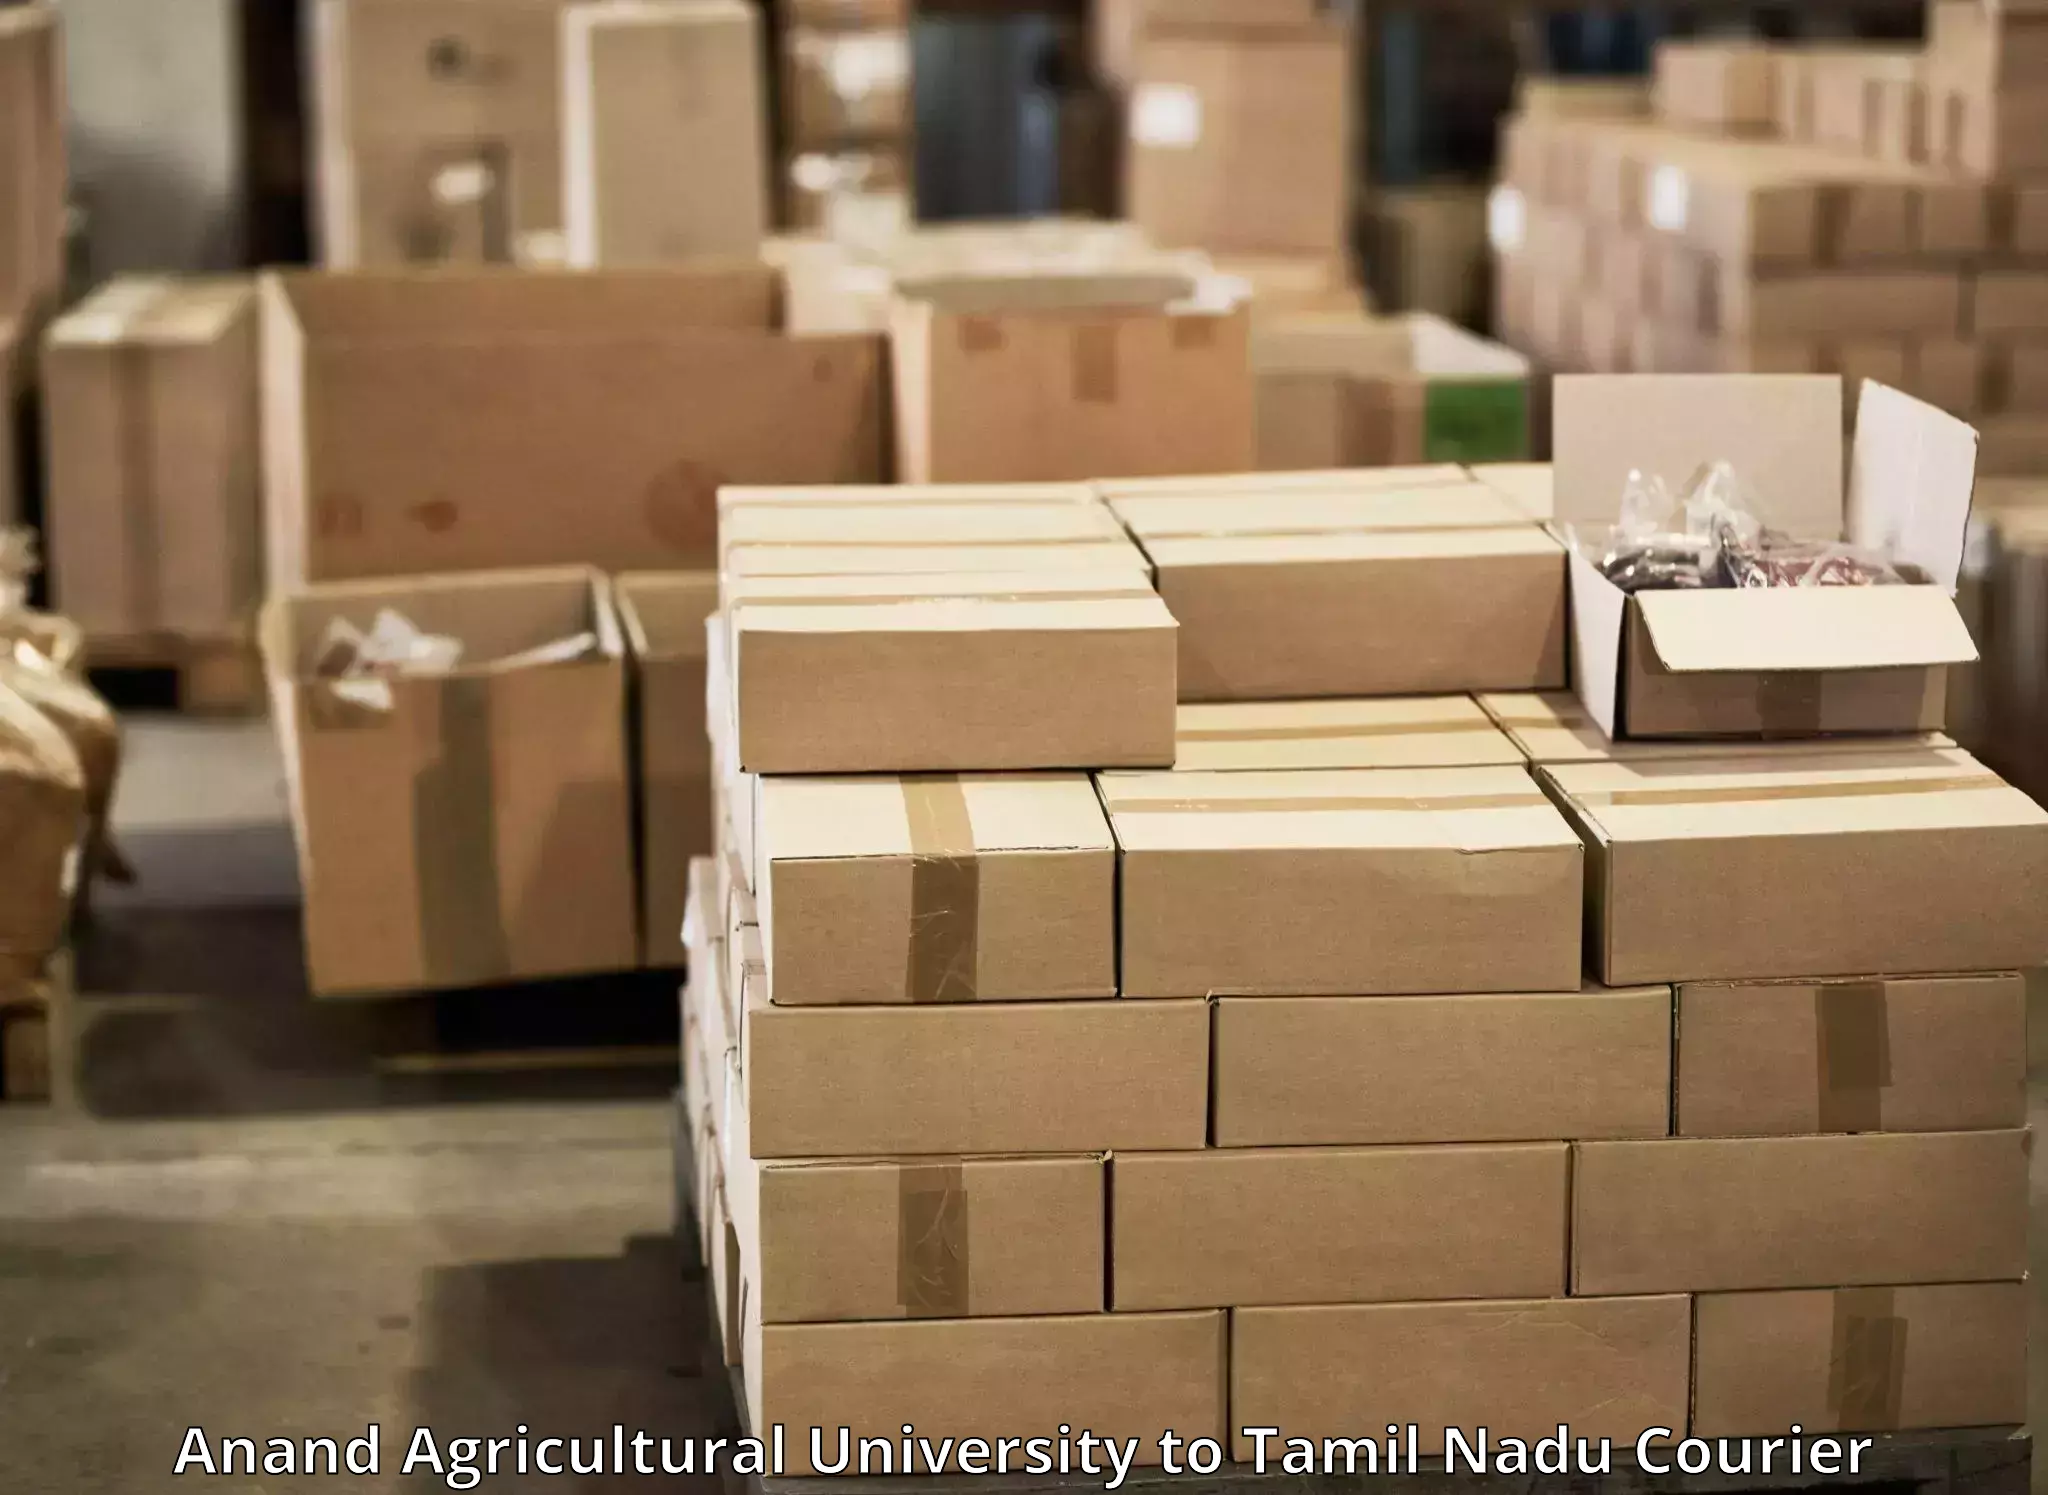 International courier networks Anand Agricultural University to Ambur